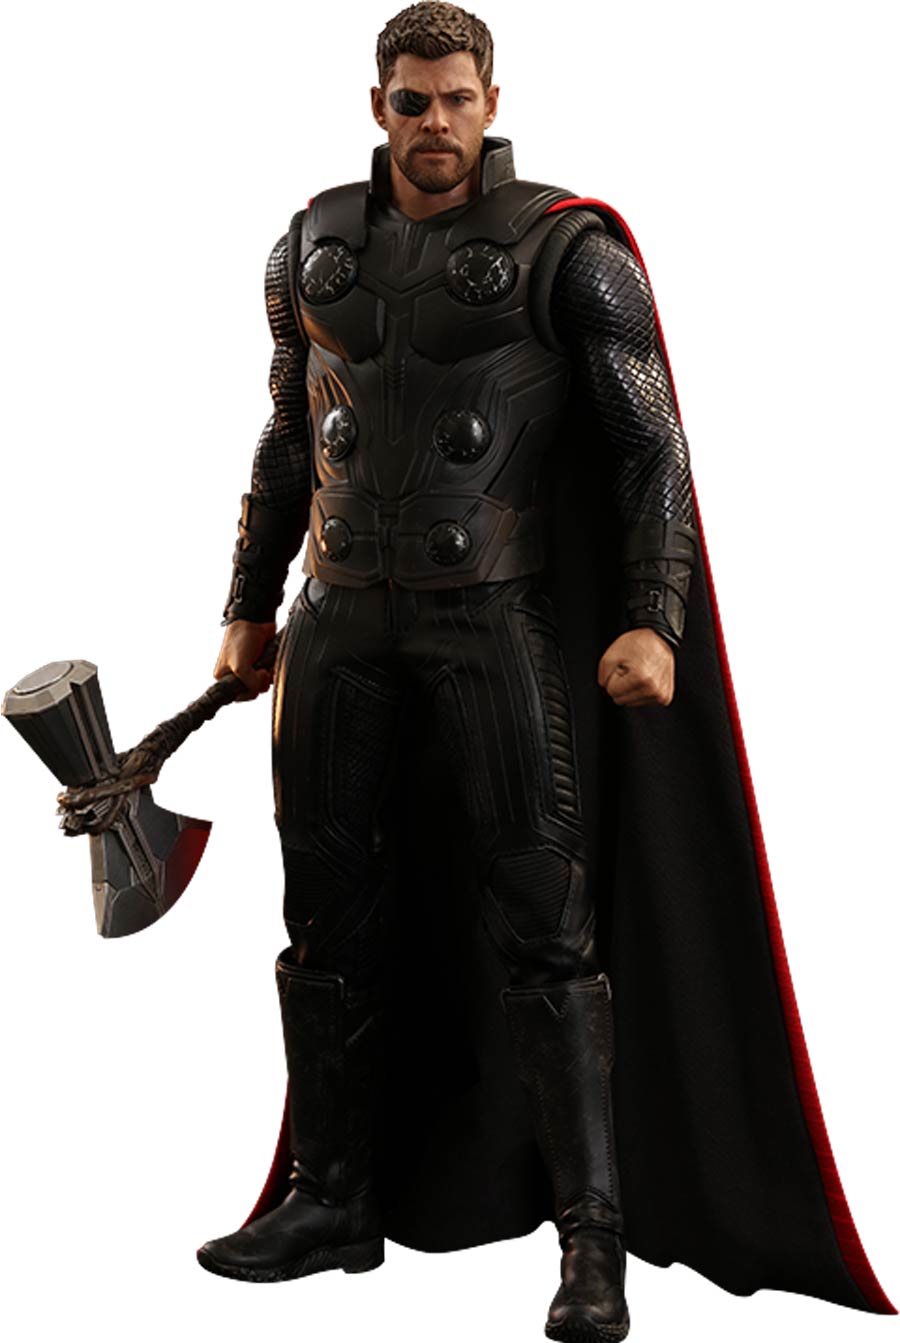 Avengers Infinity War Thor Movie Masterpiece Series Sixth Scale 12.59-Inch Figure